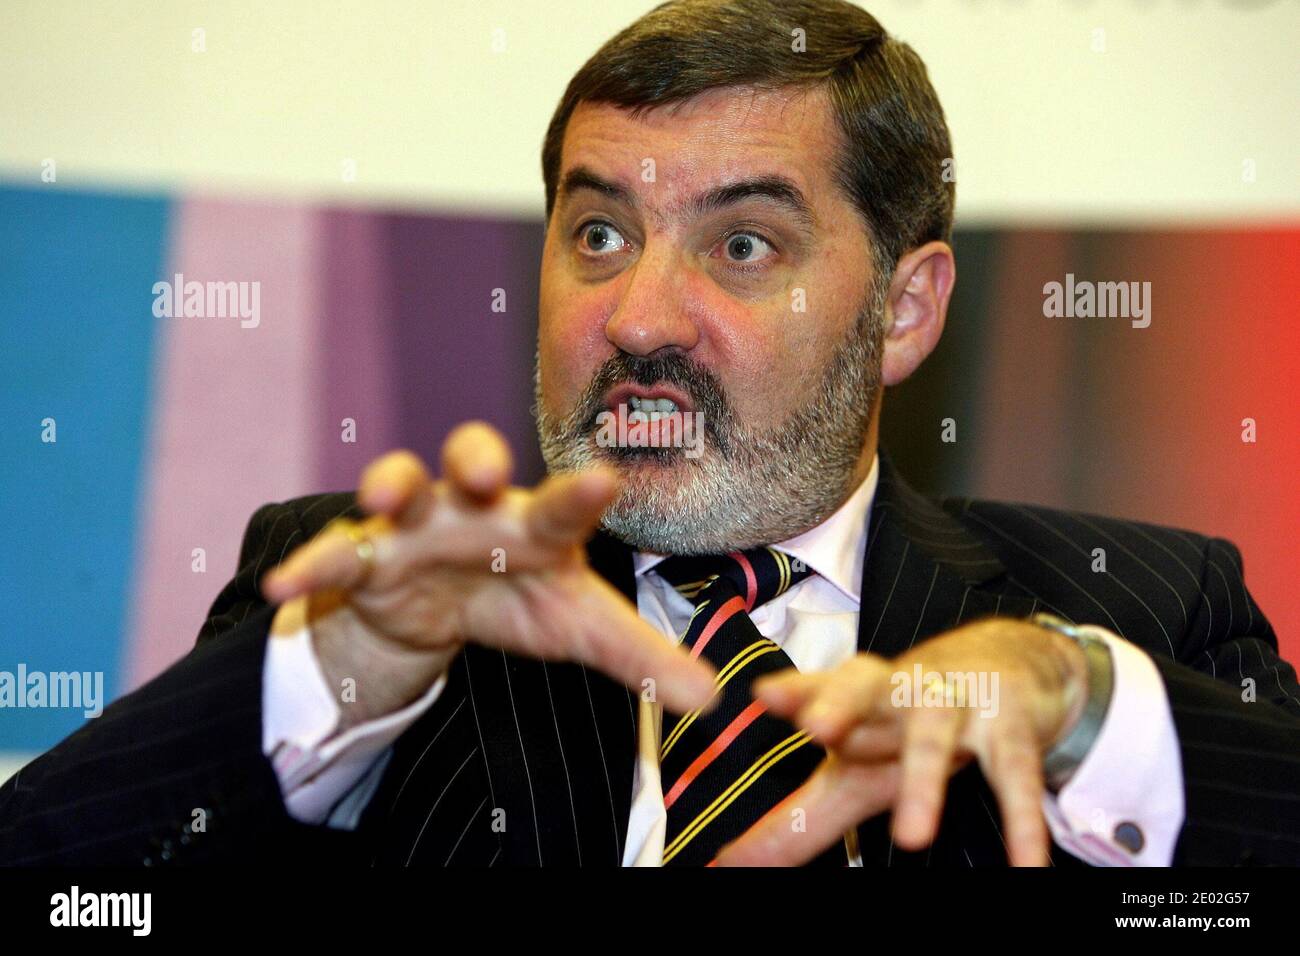 File photo dated 01/02/06 of John Alderdice who led the Alliance Party from 1987 through to the negotiation of the 1998 Good Friday Agreement, speaking at an IMC press conference at the Hilton Hotel in Belfast. He has said that real dialogue was the last thing many republicans wanted. Stock Photo